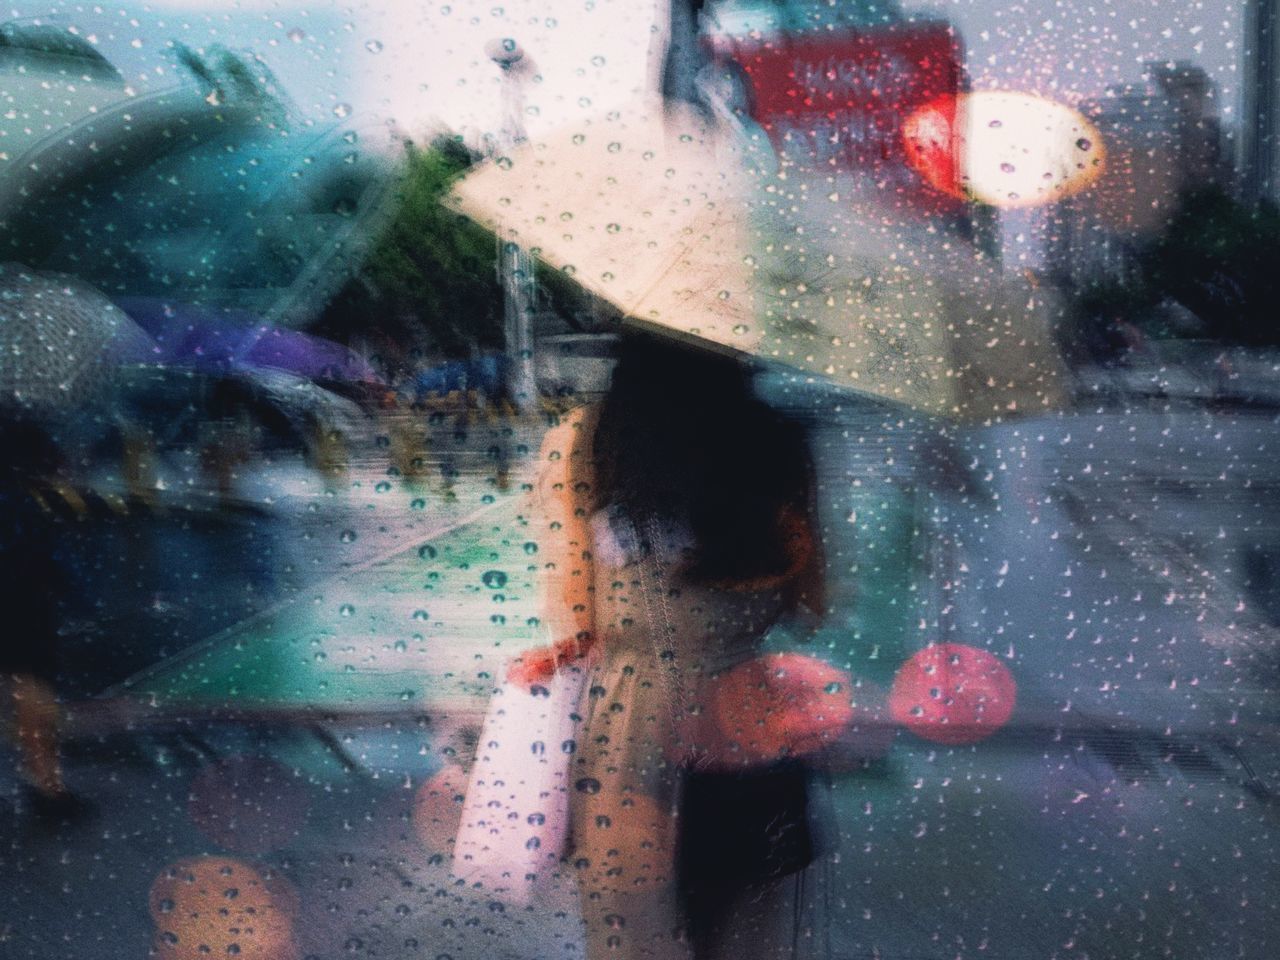 REFLECTION OF PERSON ON WET WINDOW